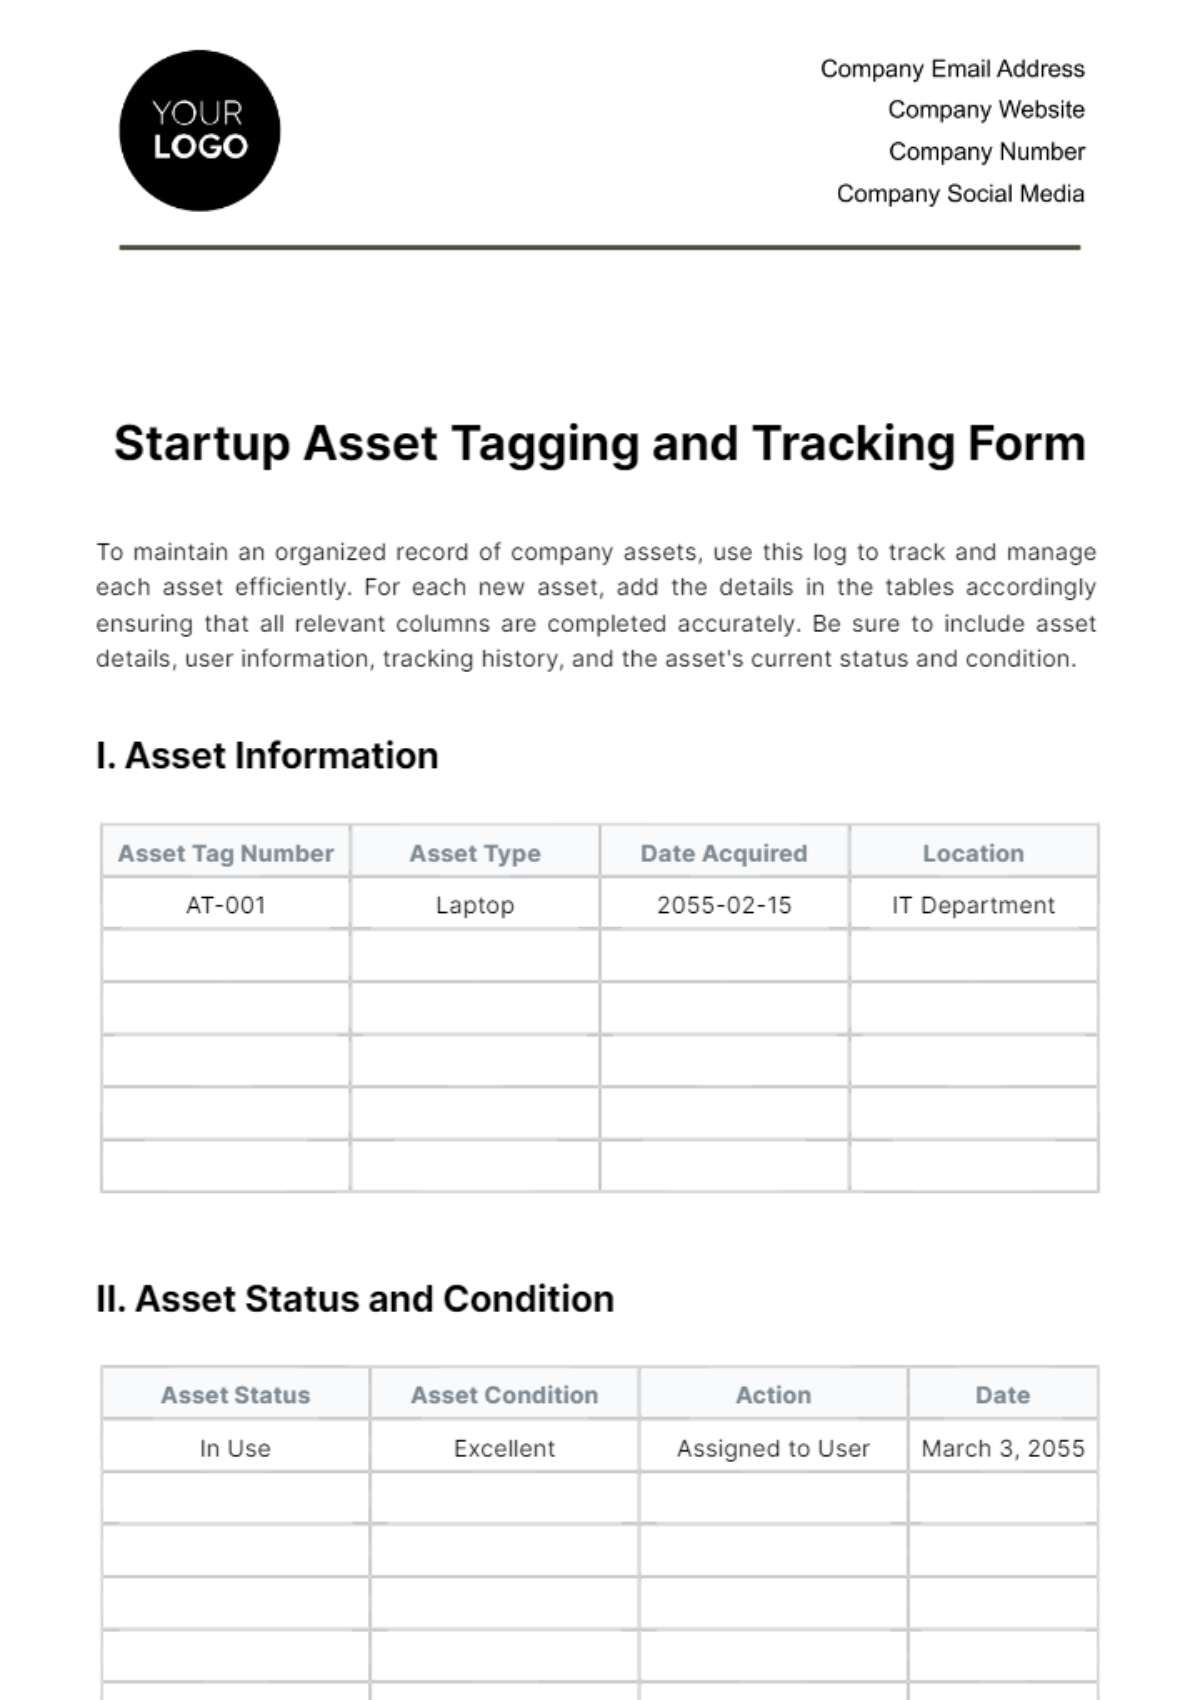 Free Startup Asset Tagging and Tracking Form Template